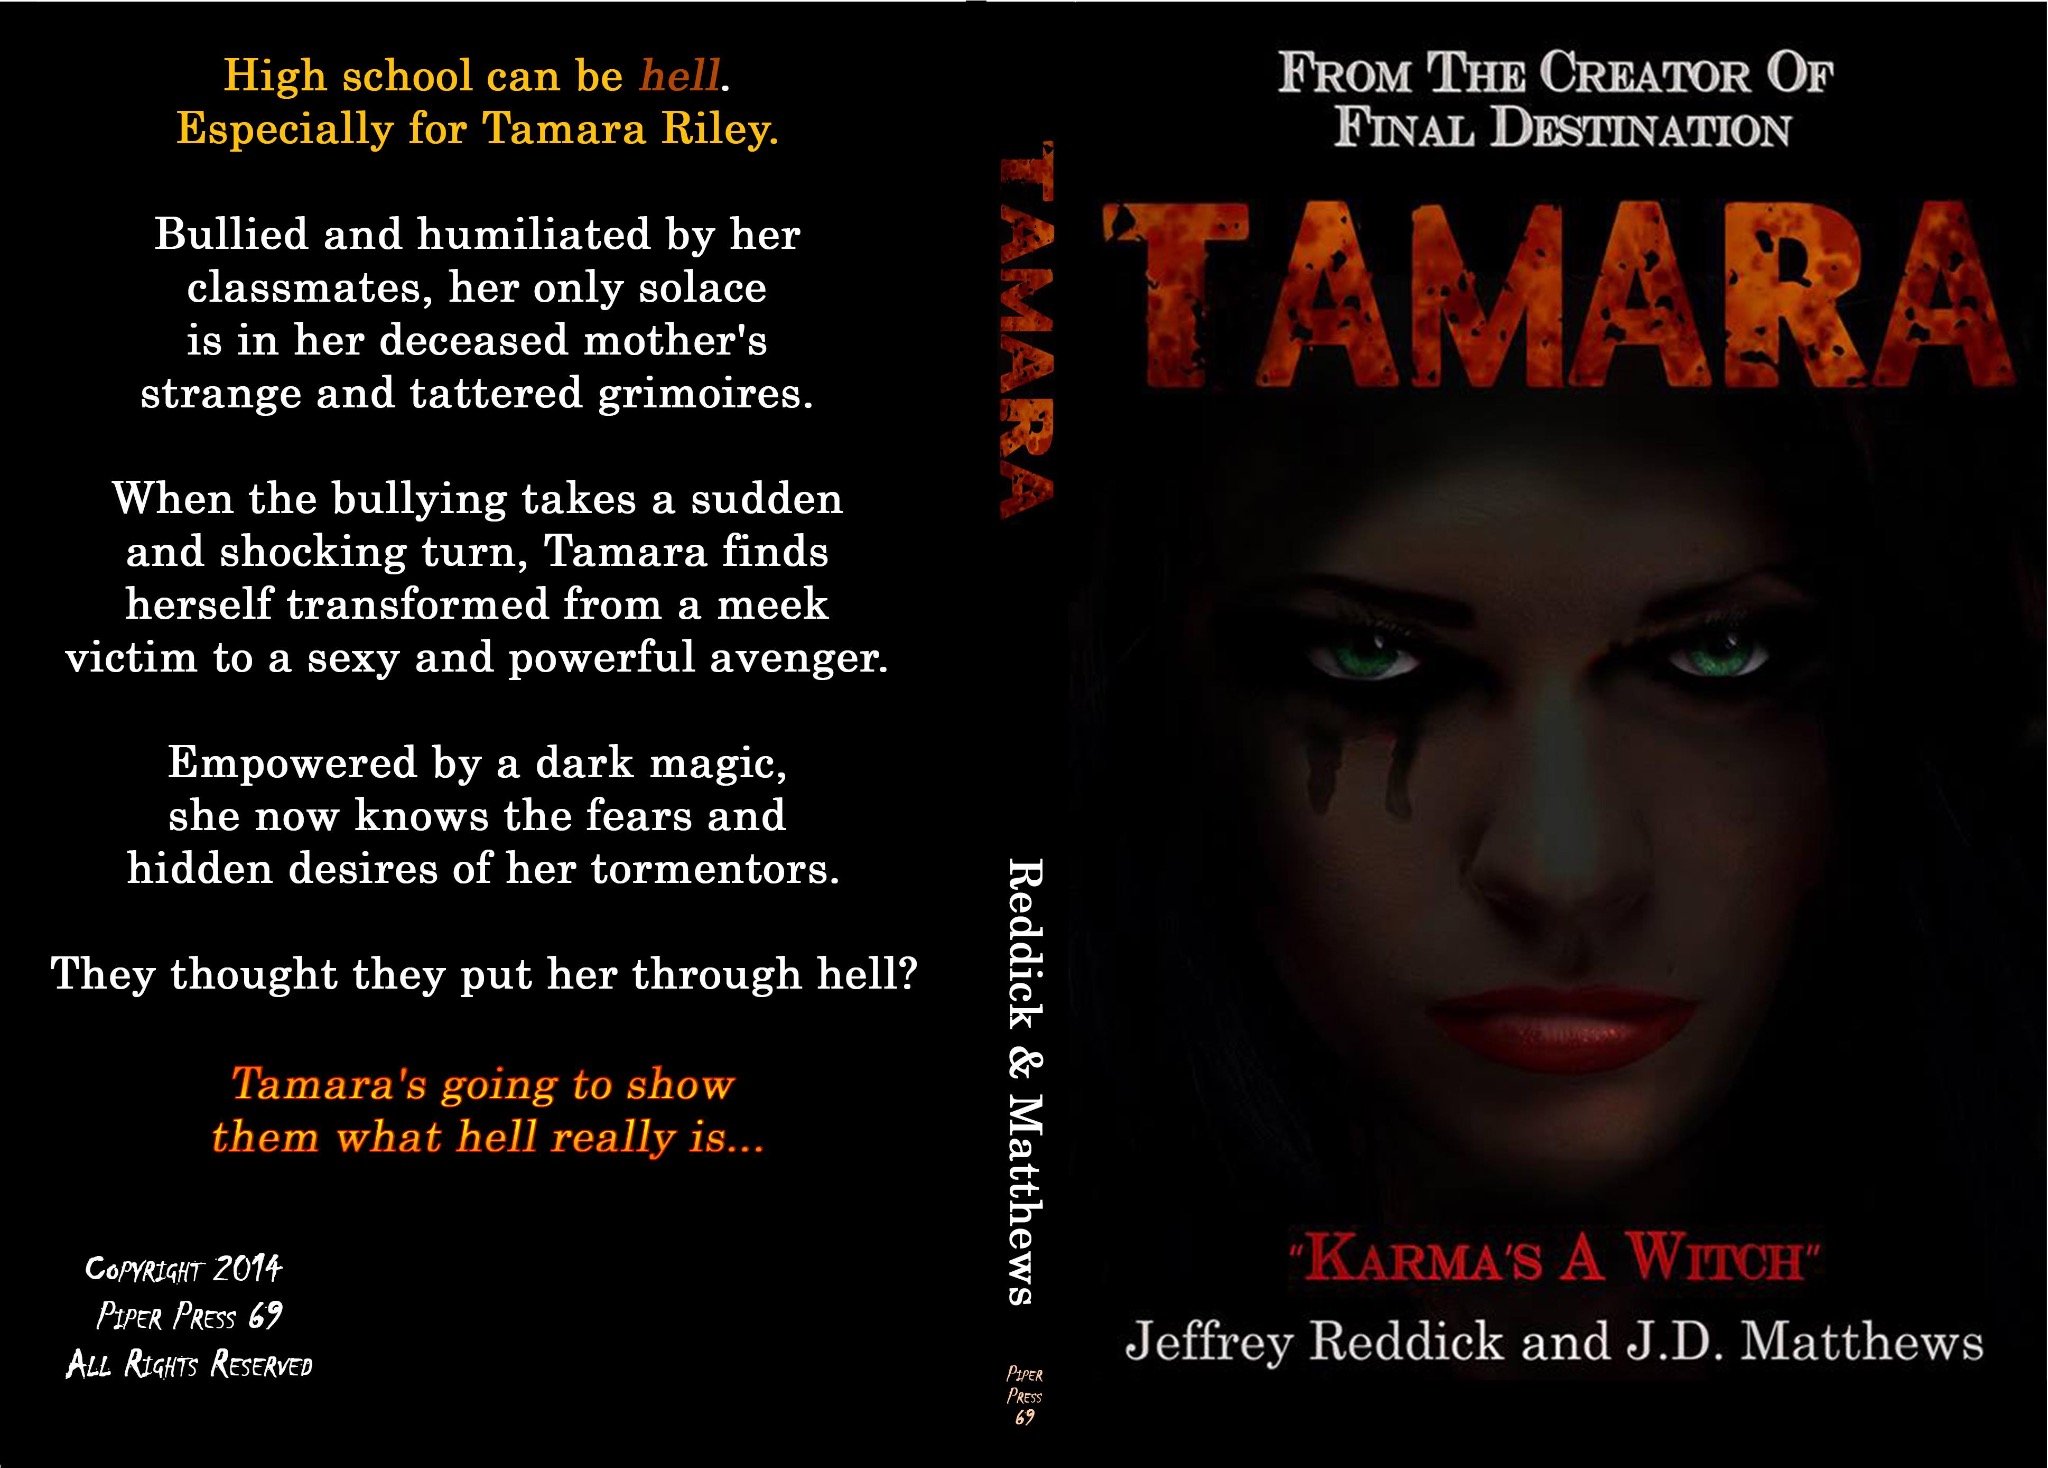 Exclusive Glimpse at the Cover for Jeffrey Reddick and J.D. Matthews' Novel Tamara Shows Karma's a Witch